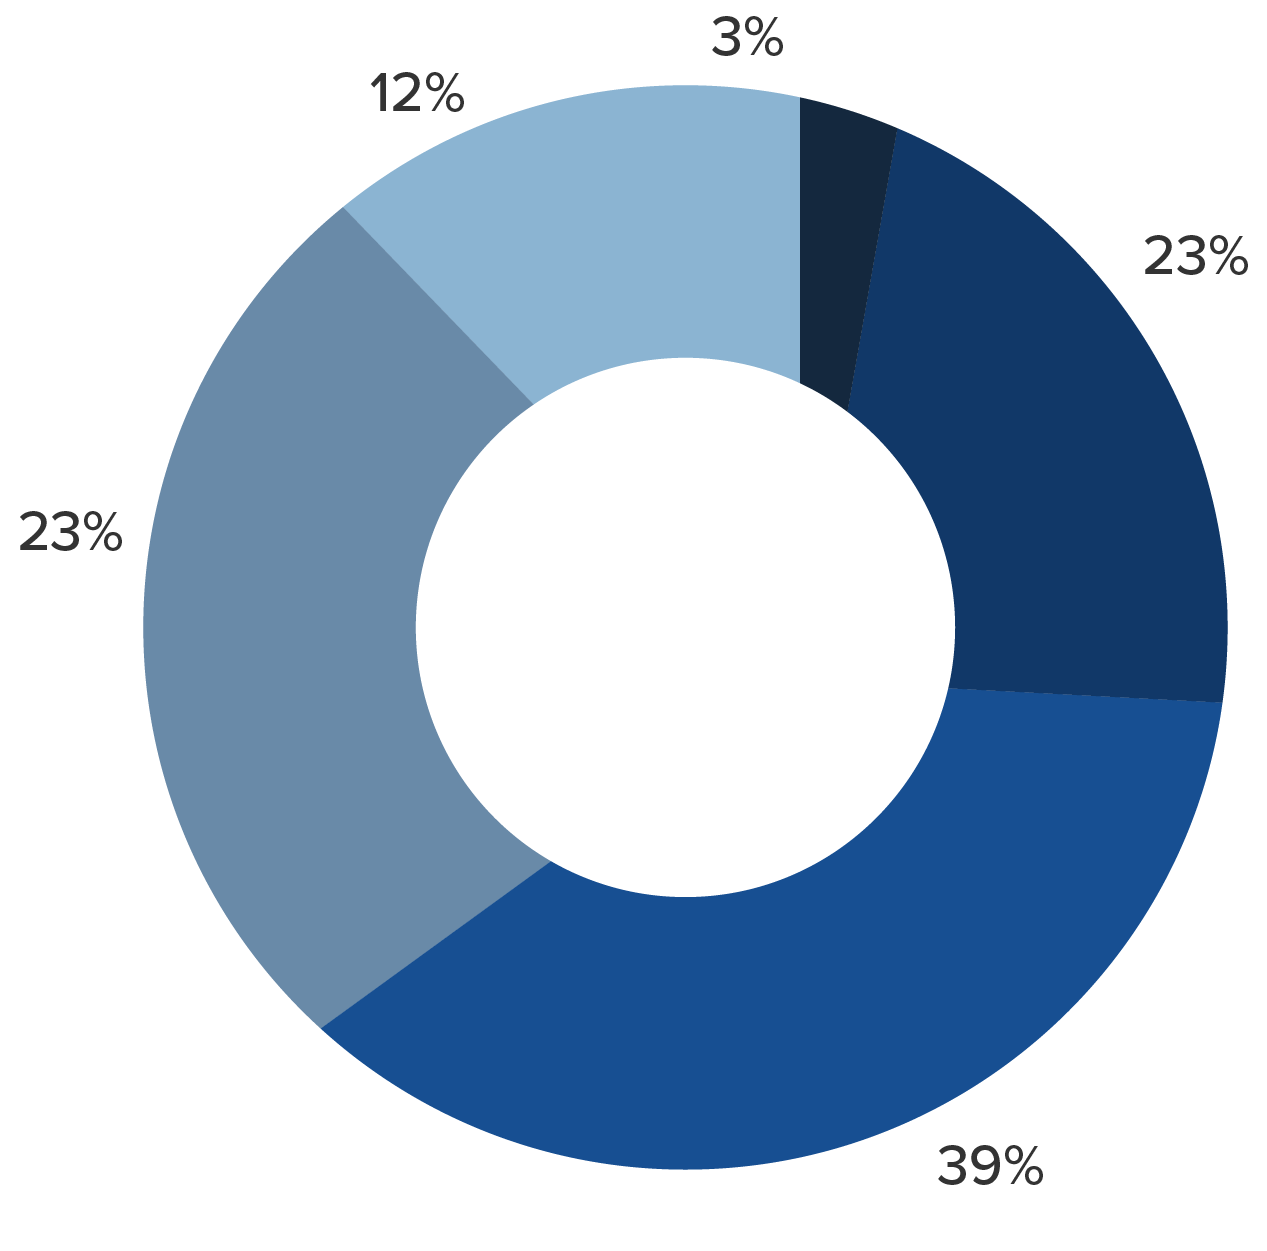 donut diagram showing percentages of global age groups